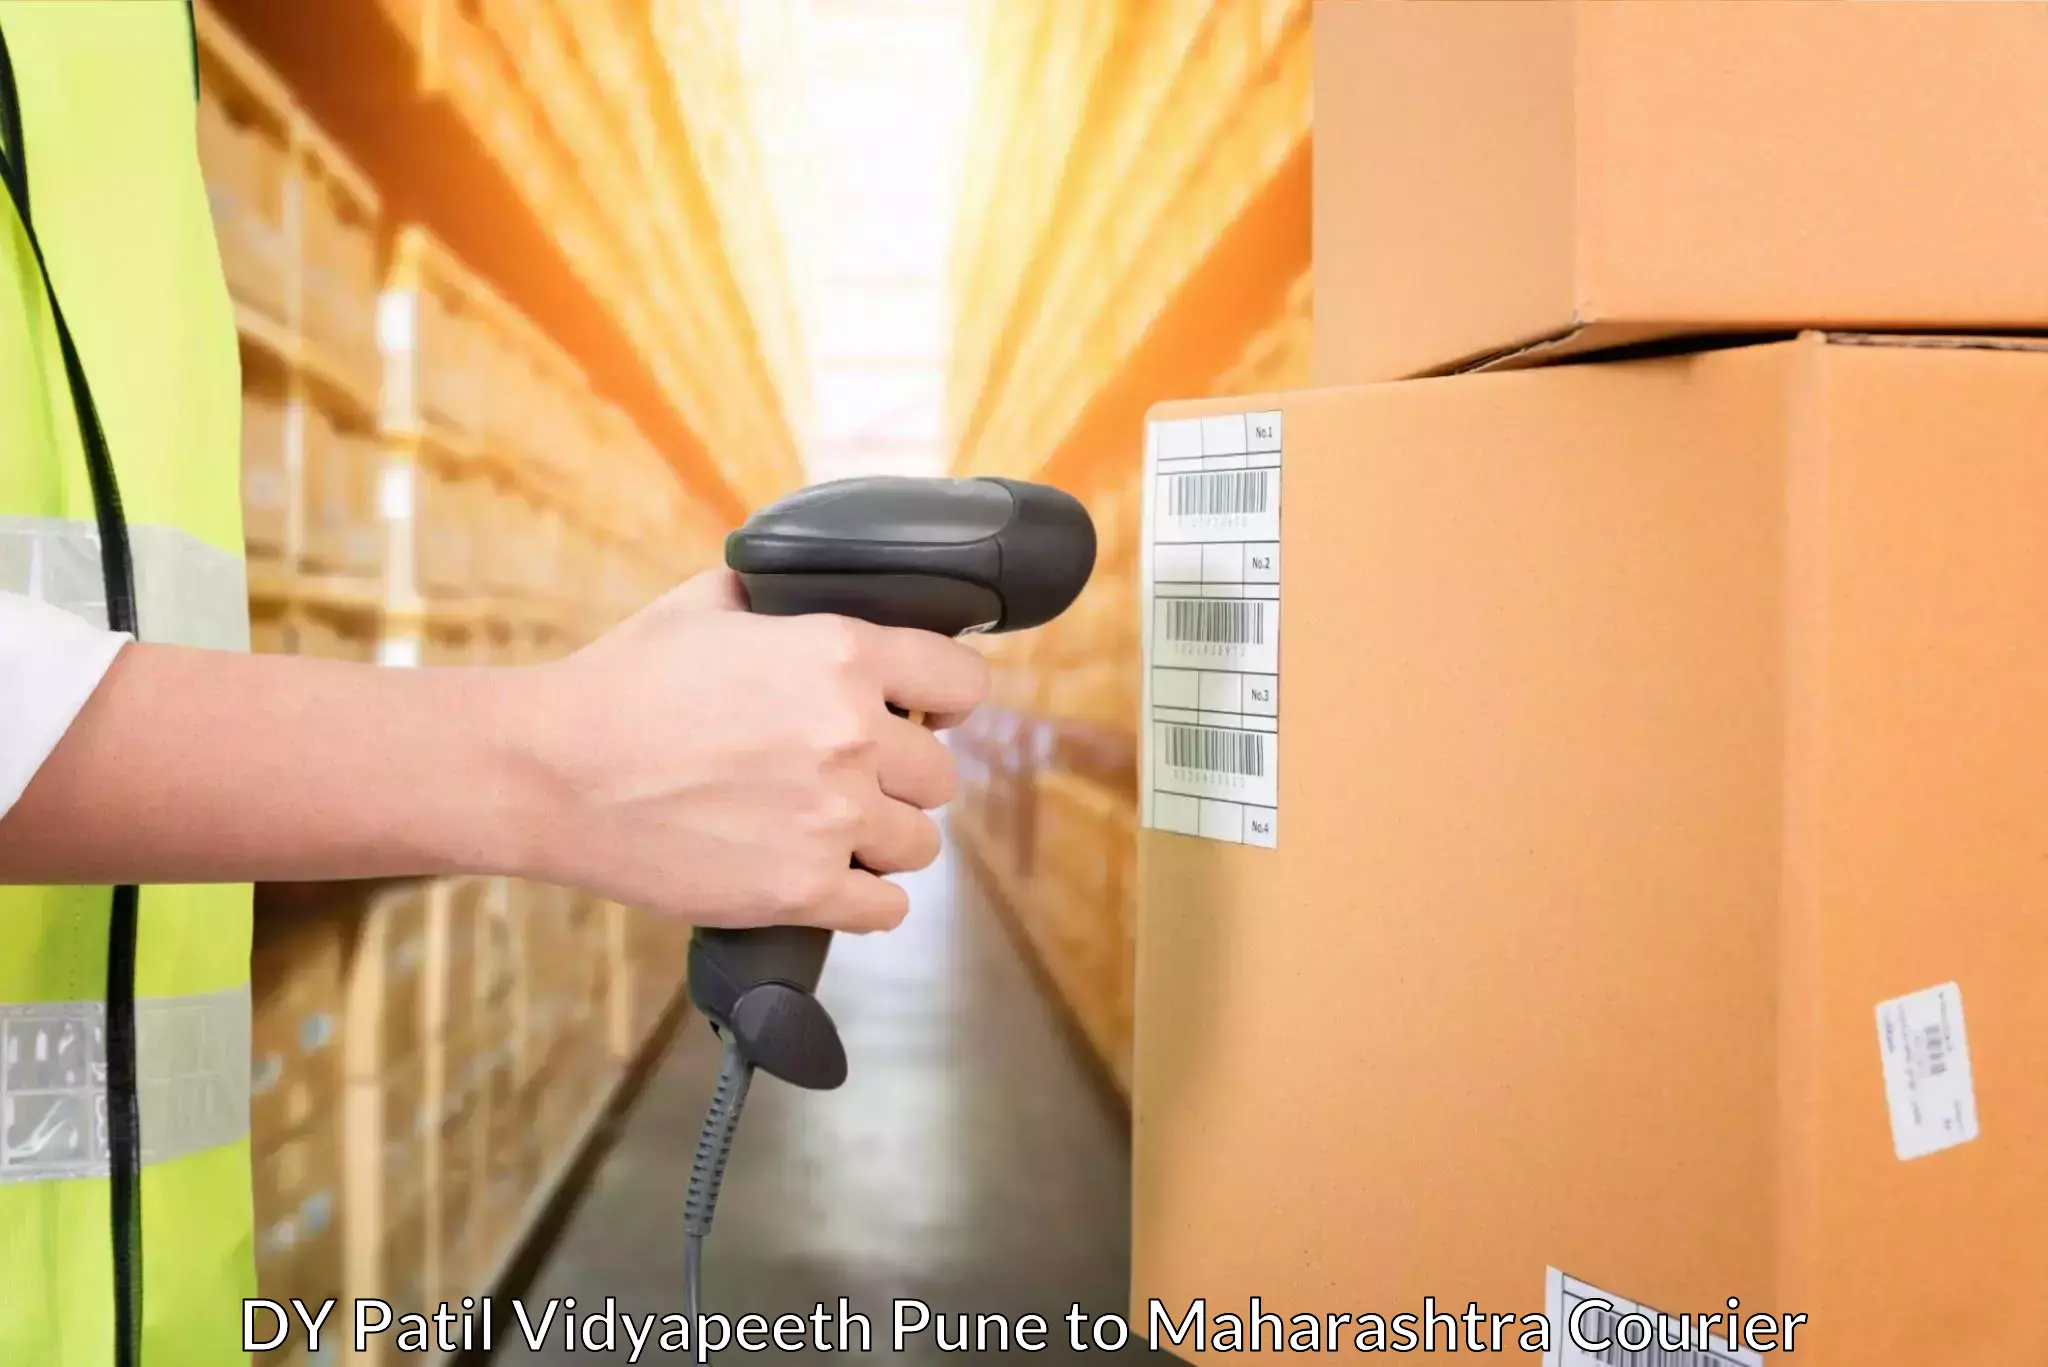 Premium delivery services in DY Patil Vidyapeeth Pune to Kopargaon